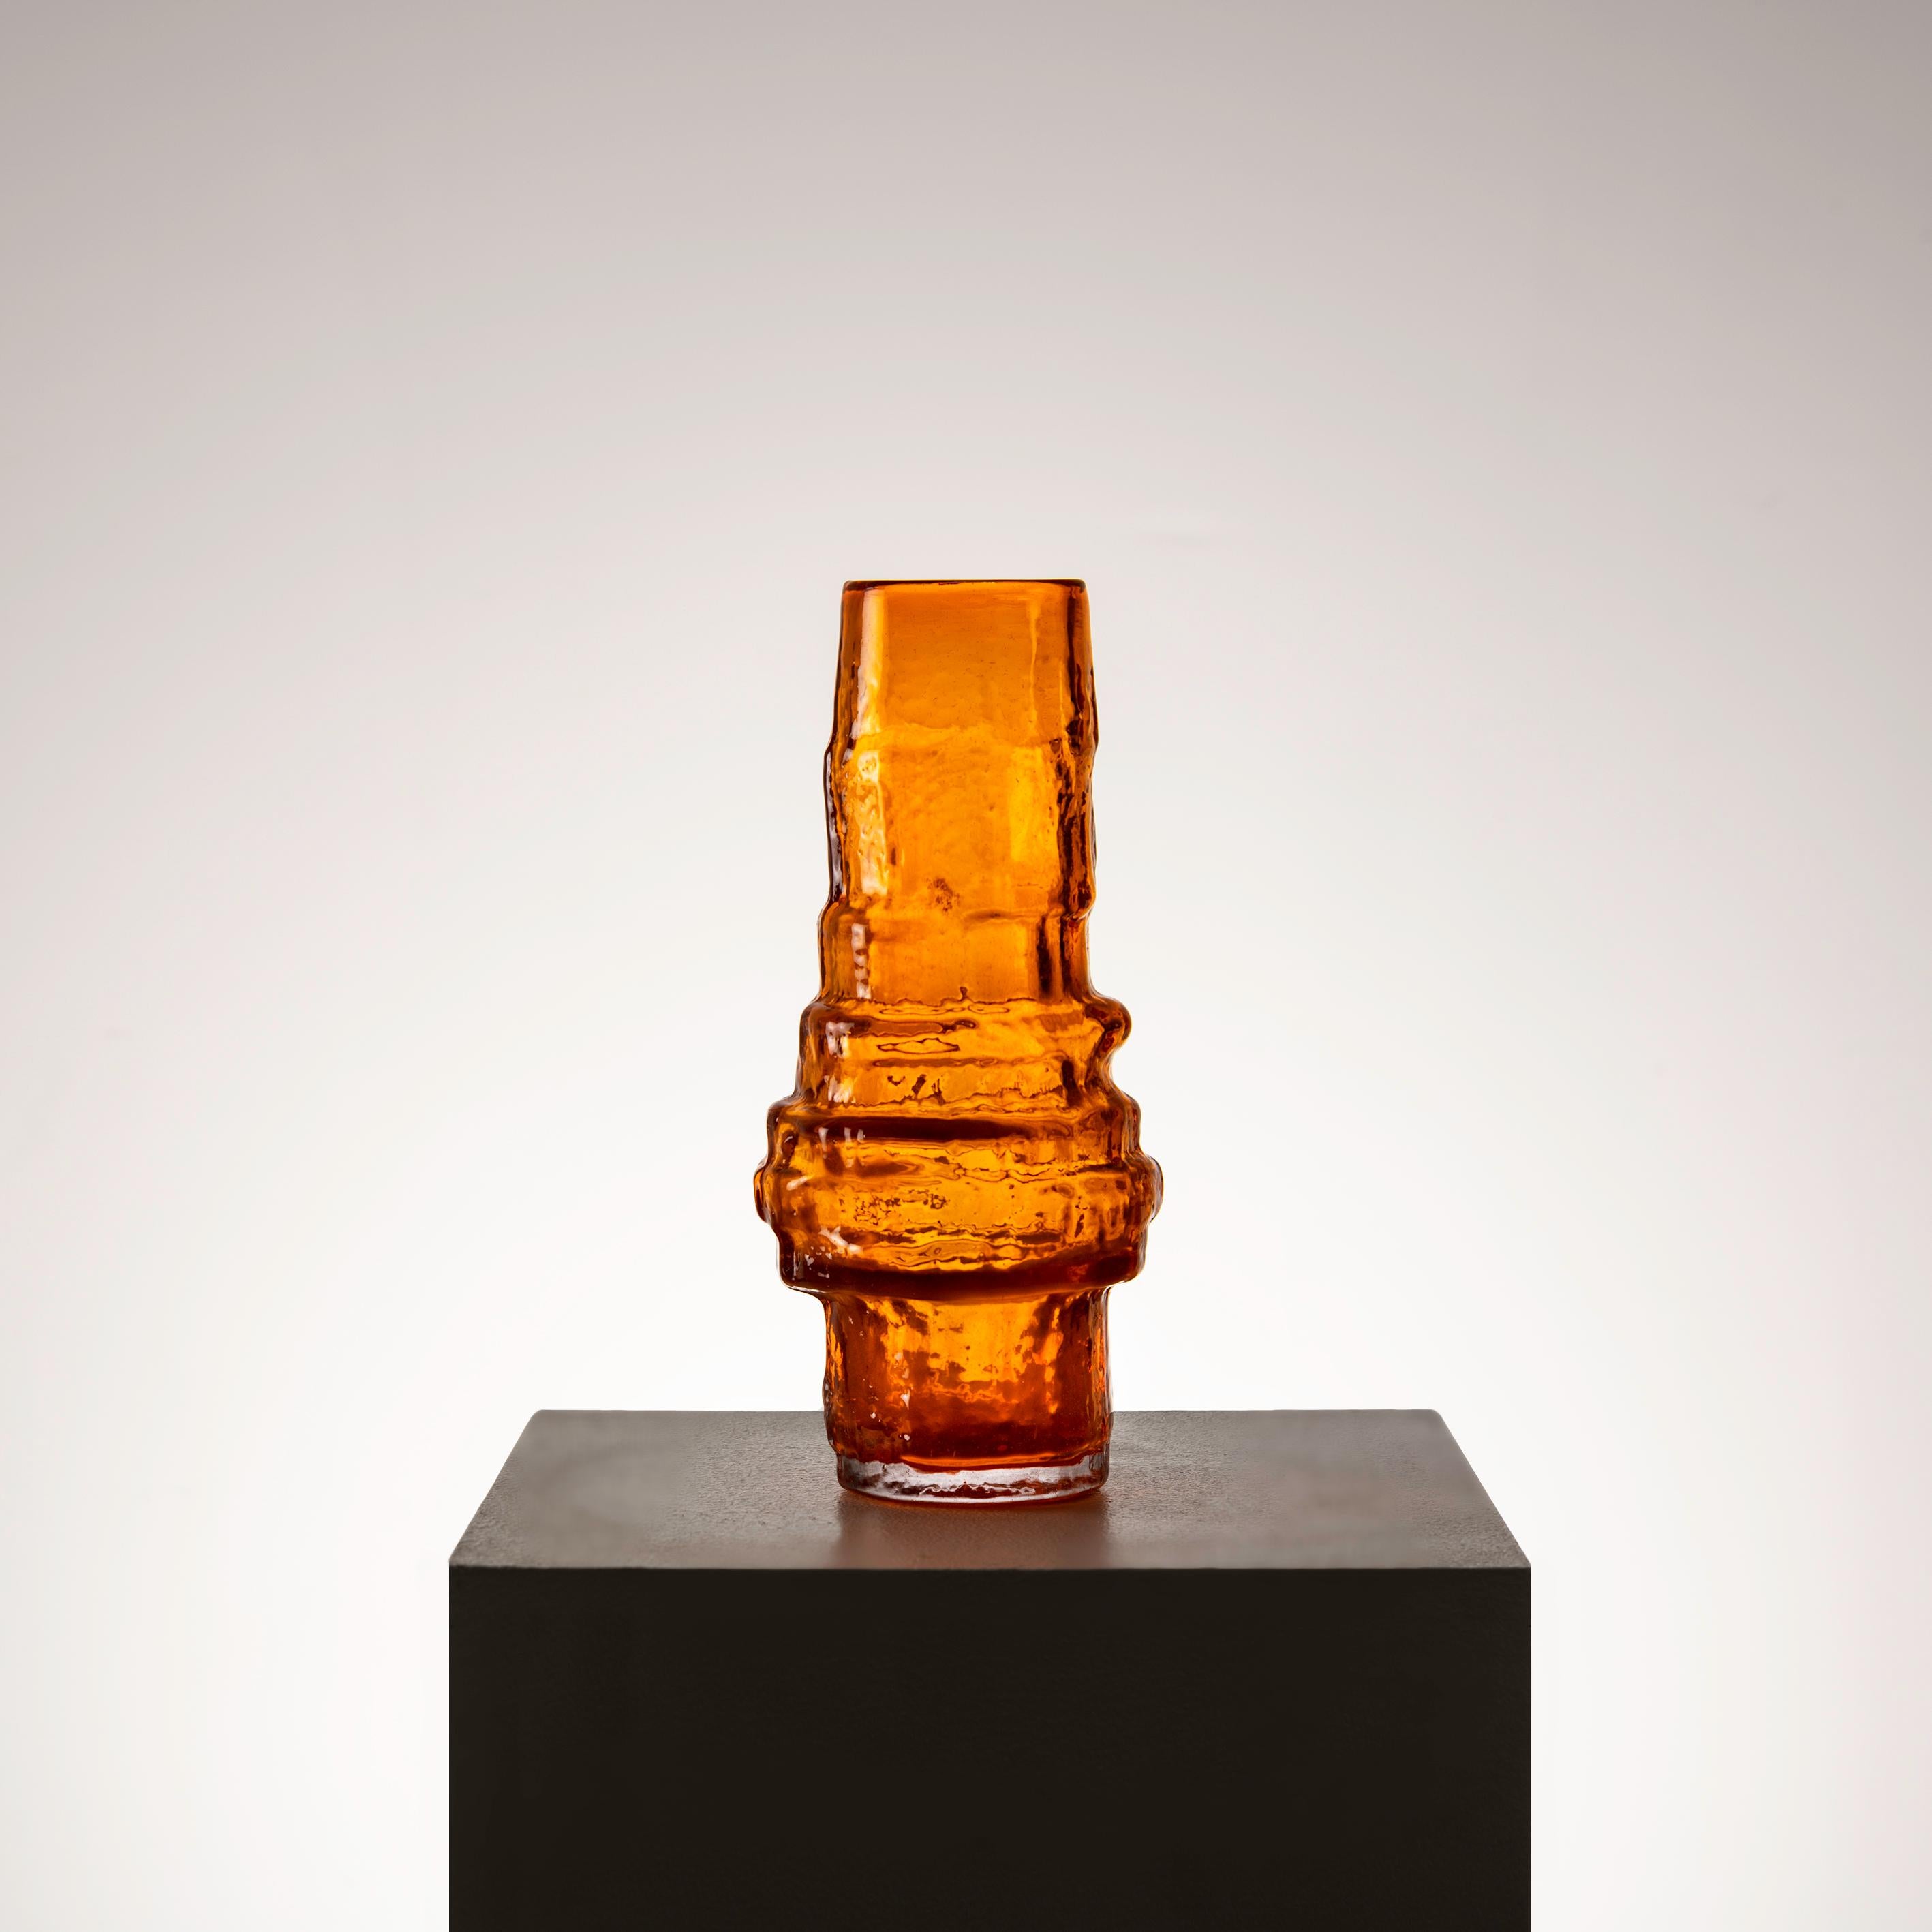 Art Glass Textured Orange Glass Vase by Geoffrey Baxter for Whitefriars, 1960s For Sale